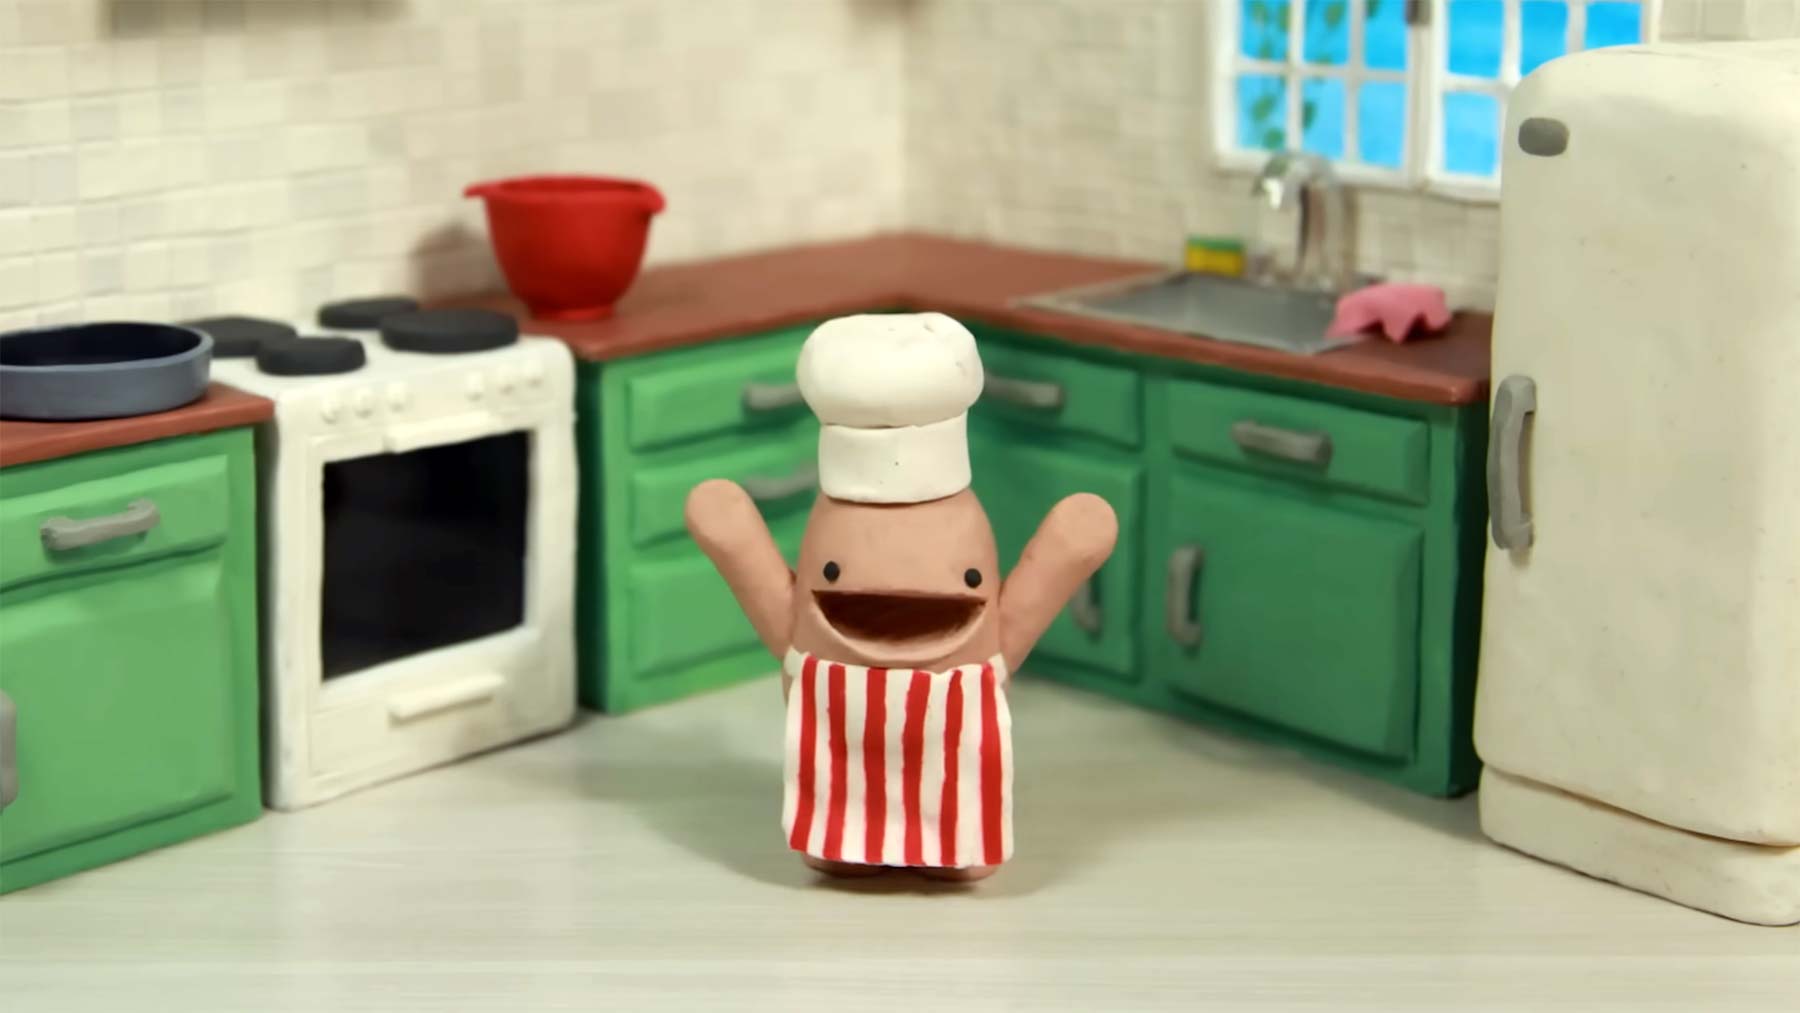 Tolle Claymation: "Chef Boi" guldies-chef-boi-stopmotion-animation-short 